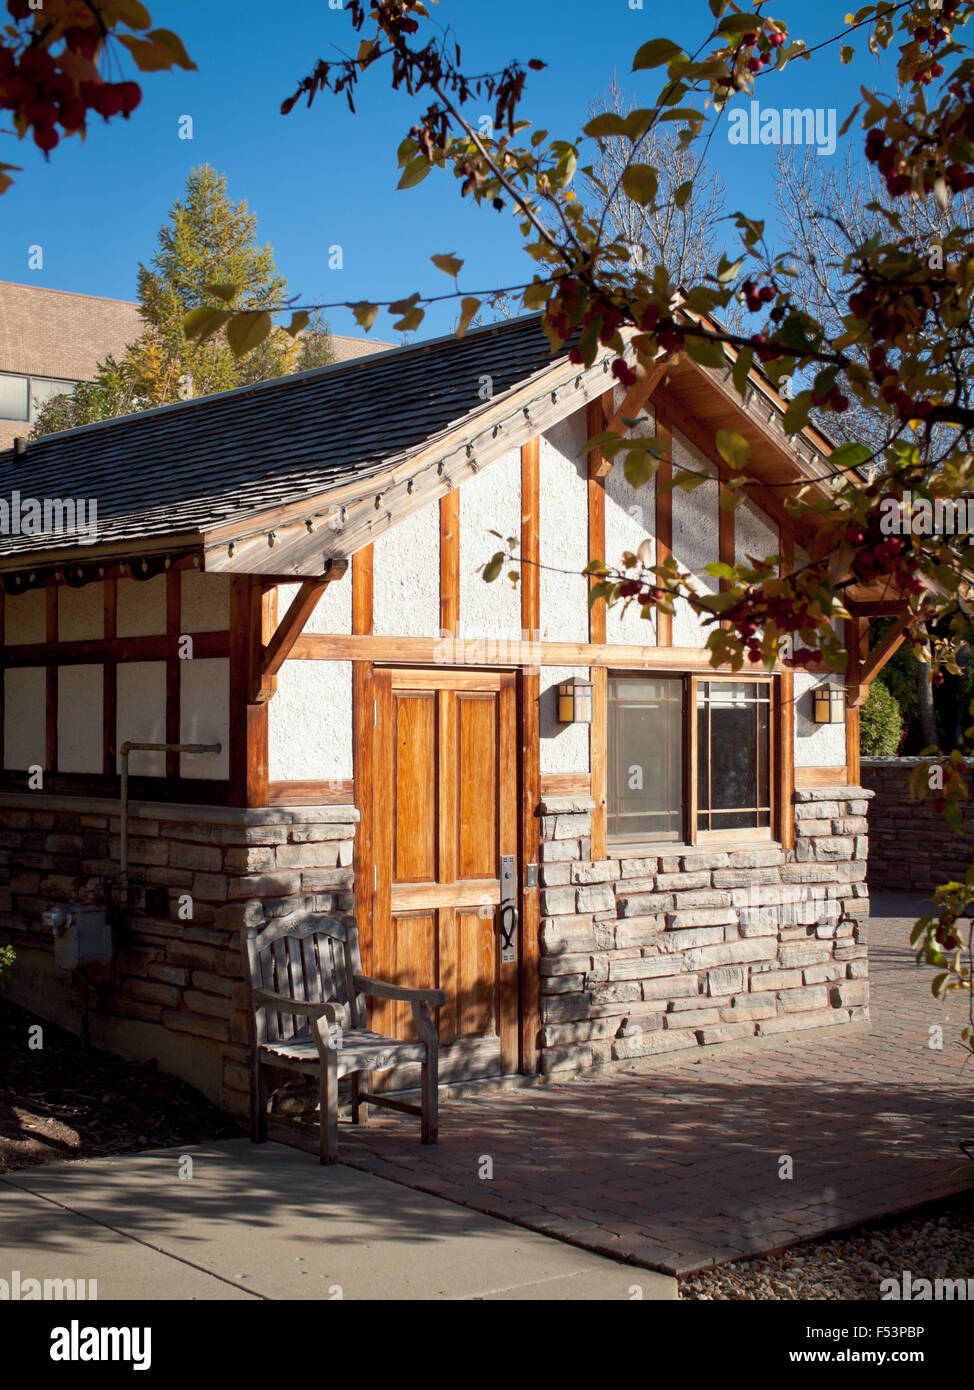 A view of the Japanese chalet at Garden Park (Boffins Public House), Innovation Place in Saskatoon, Saskatchewan, Canada. Stock Photo